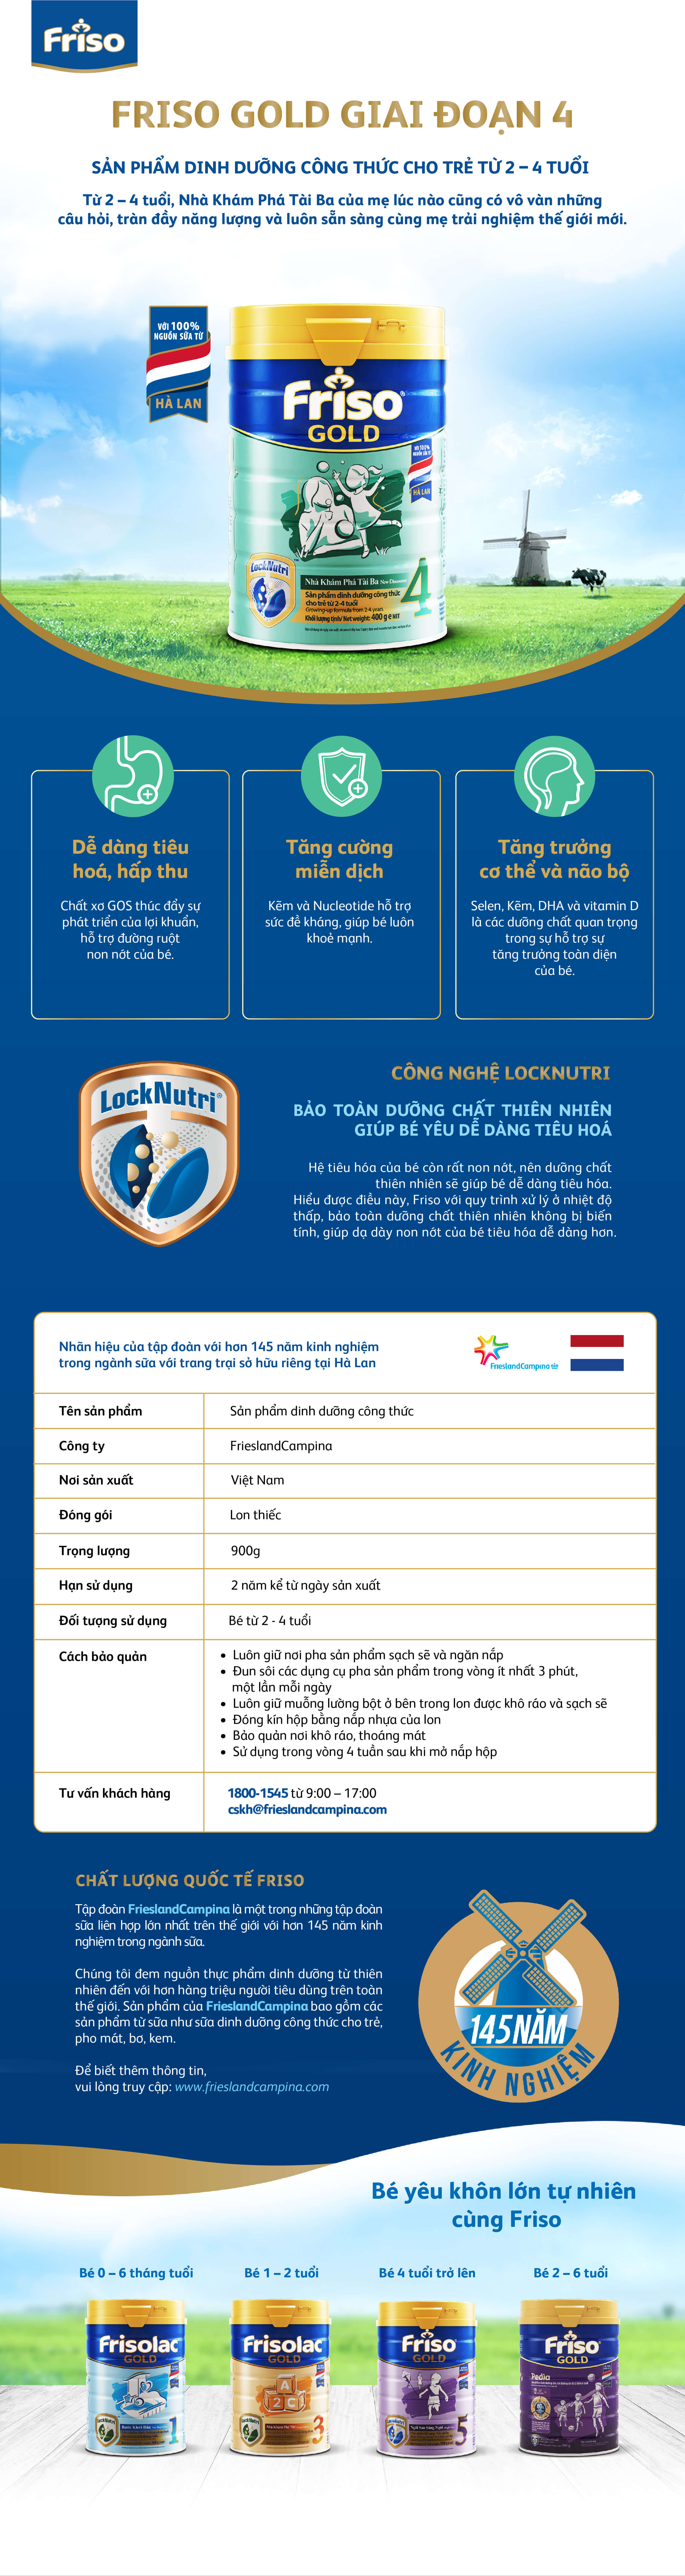 friso-master infographic-04